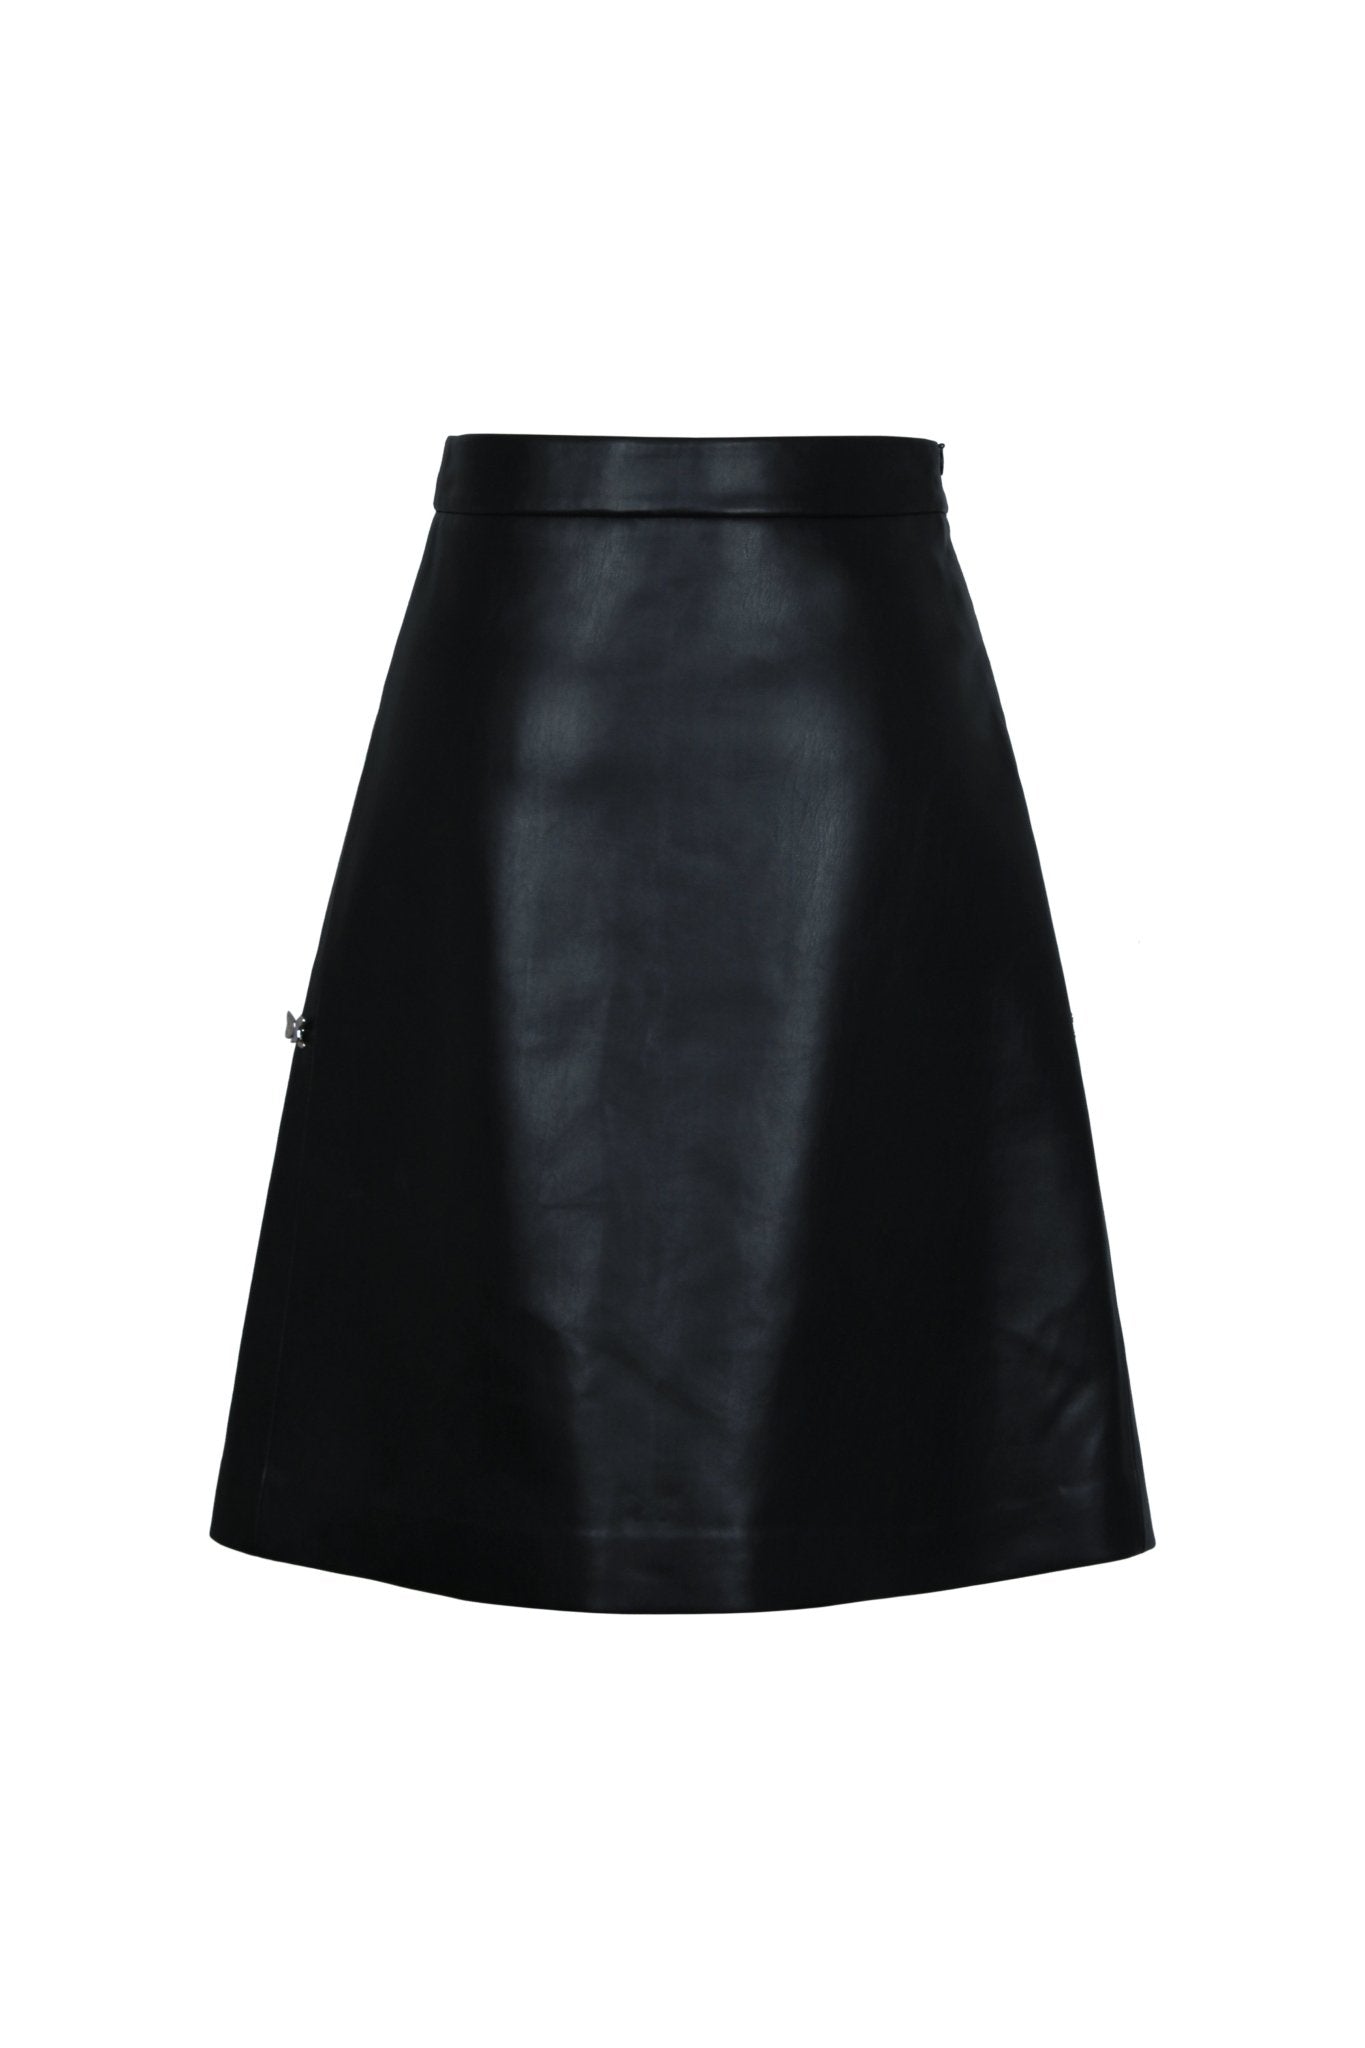 CALVIN LUO Black Small Butterfly Decorated Leather Skirt | MADA IN CHINA